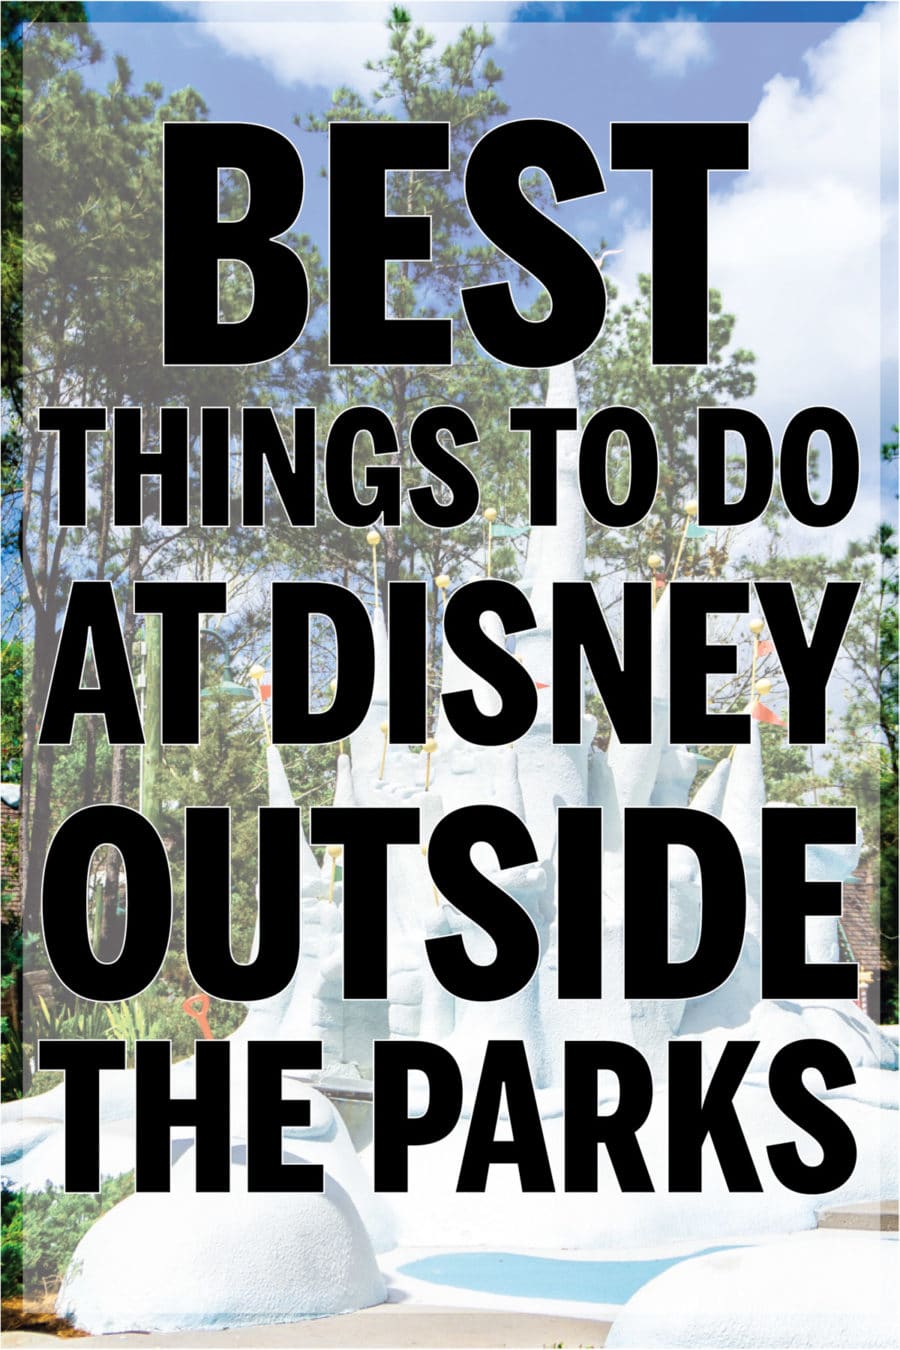 Best things to do at Disney World outside of the parks! Great ideas for kids, for teens, and even secret items for adults! Add these to your Disney bucket lists for sure!